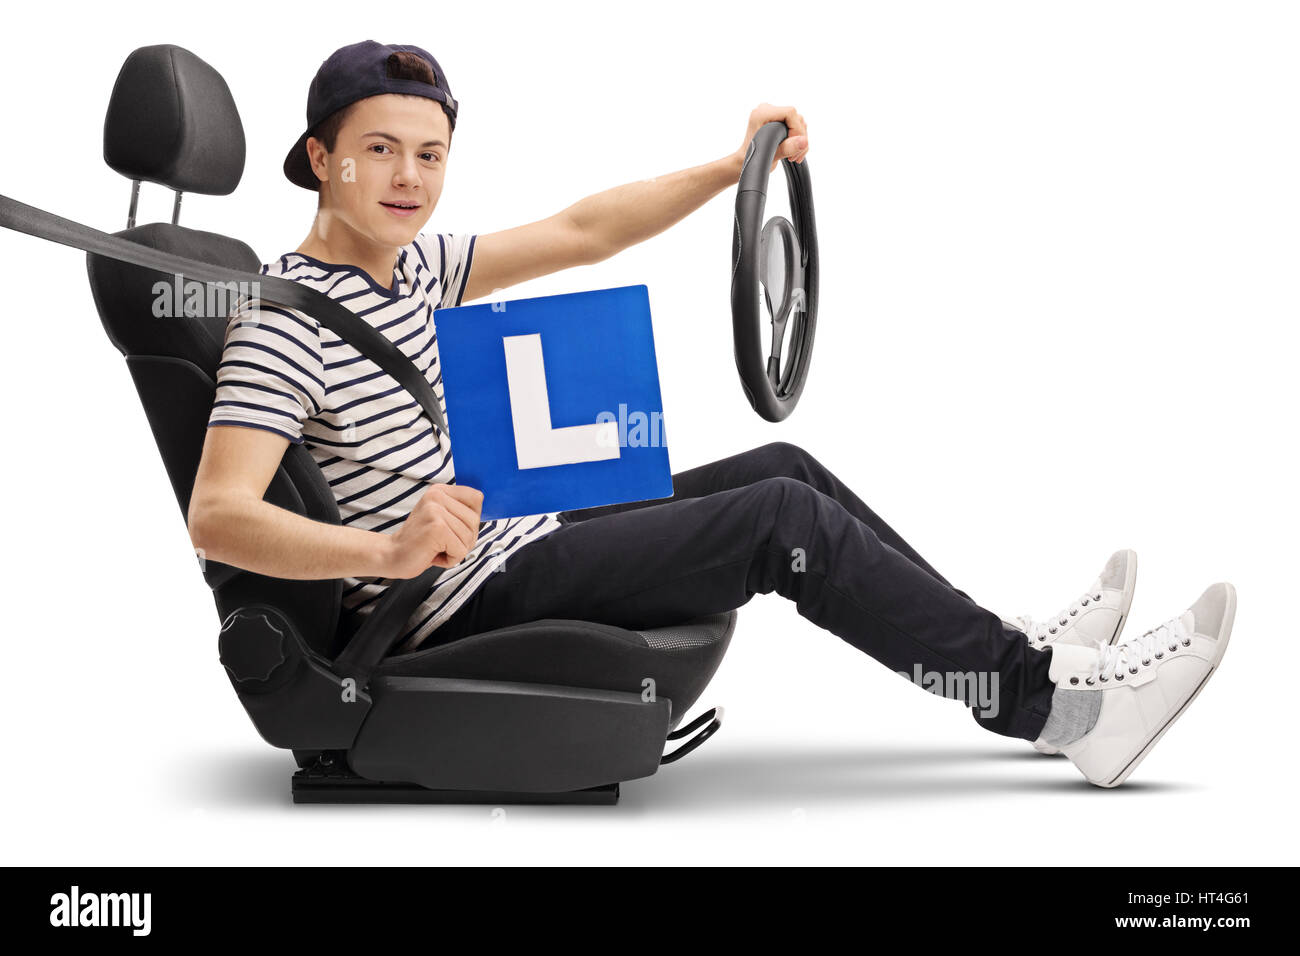 Teenage driver in a car seat showing an L-sign isolated on white background Stock Photo